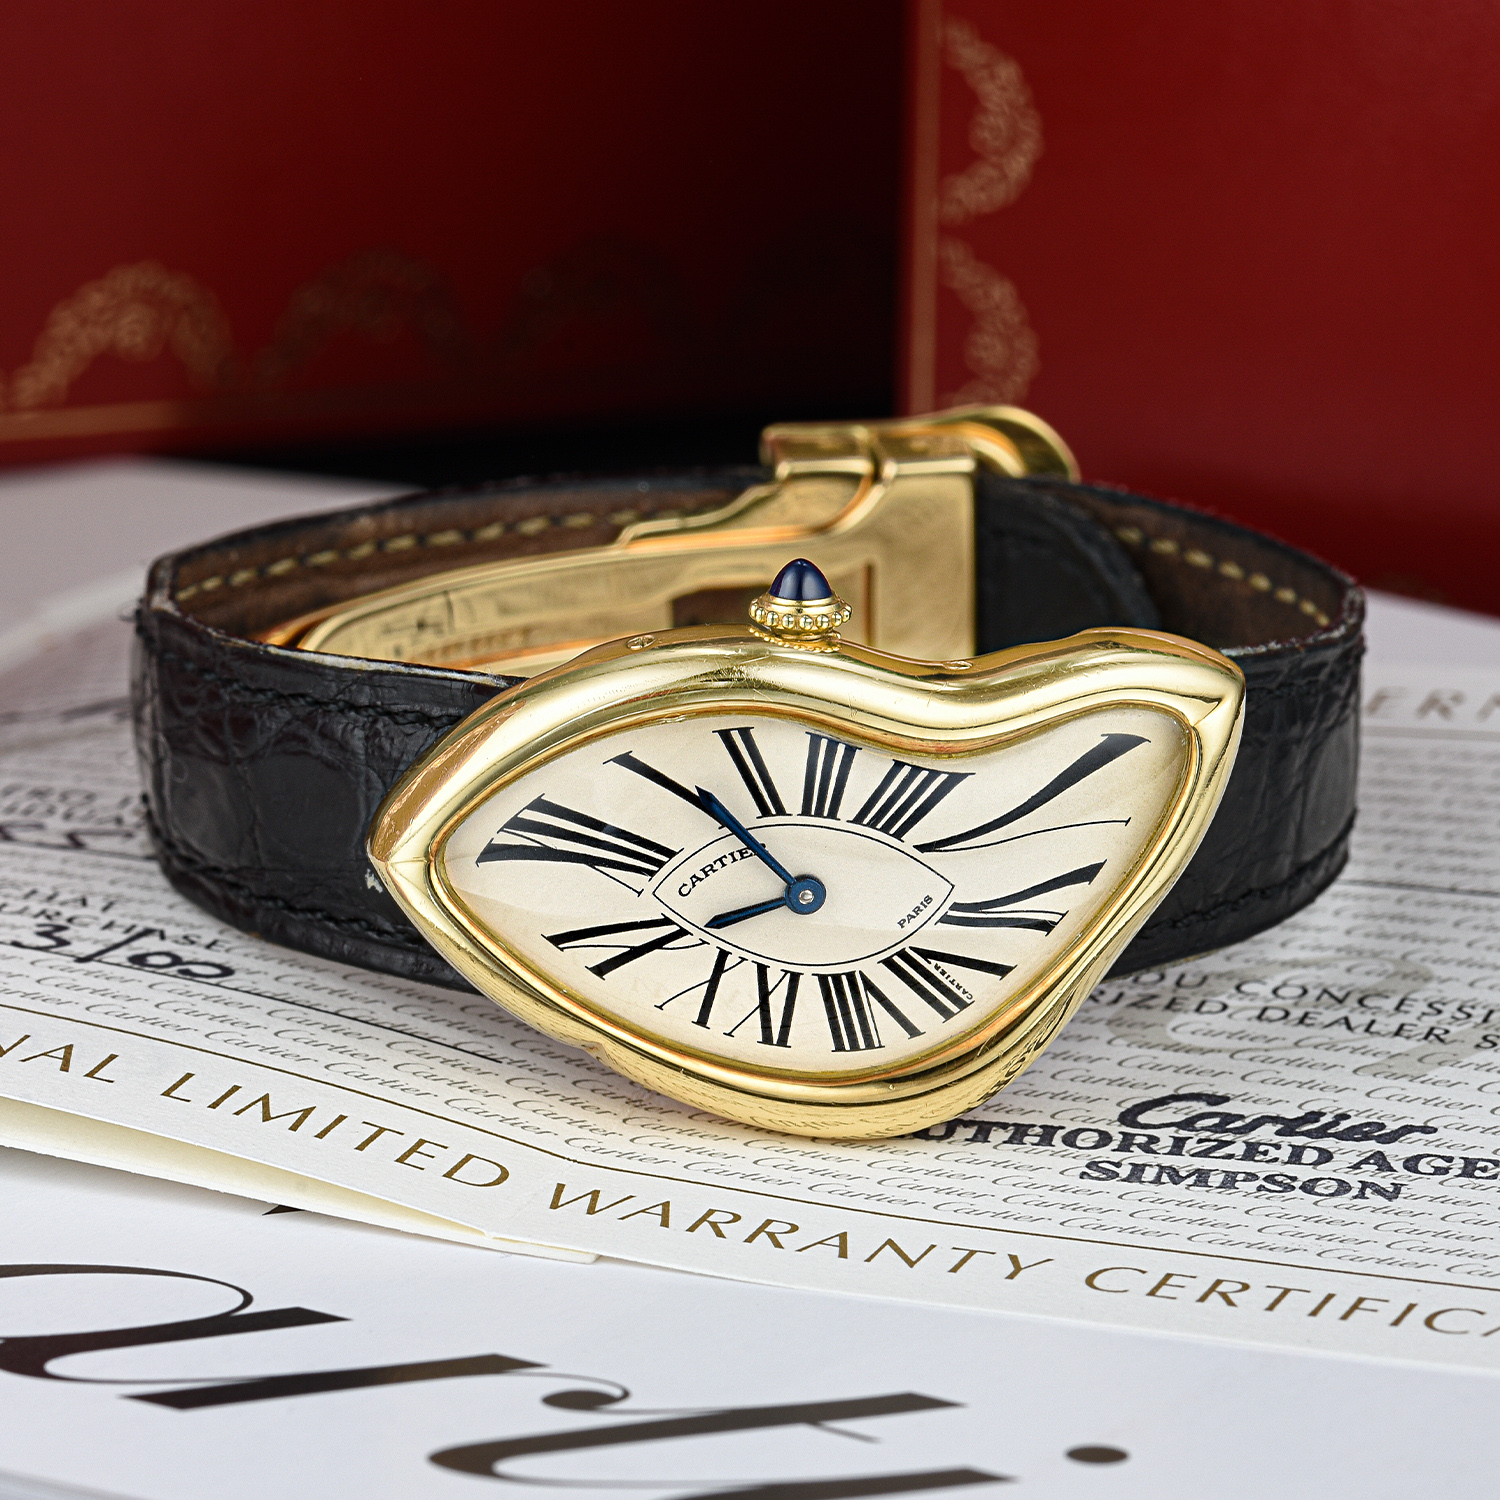 Cartier Archives | Fortuna Auction in 